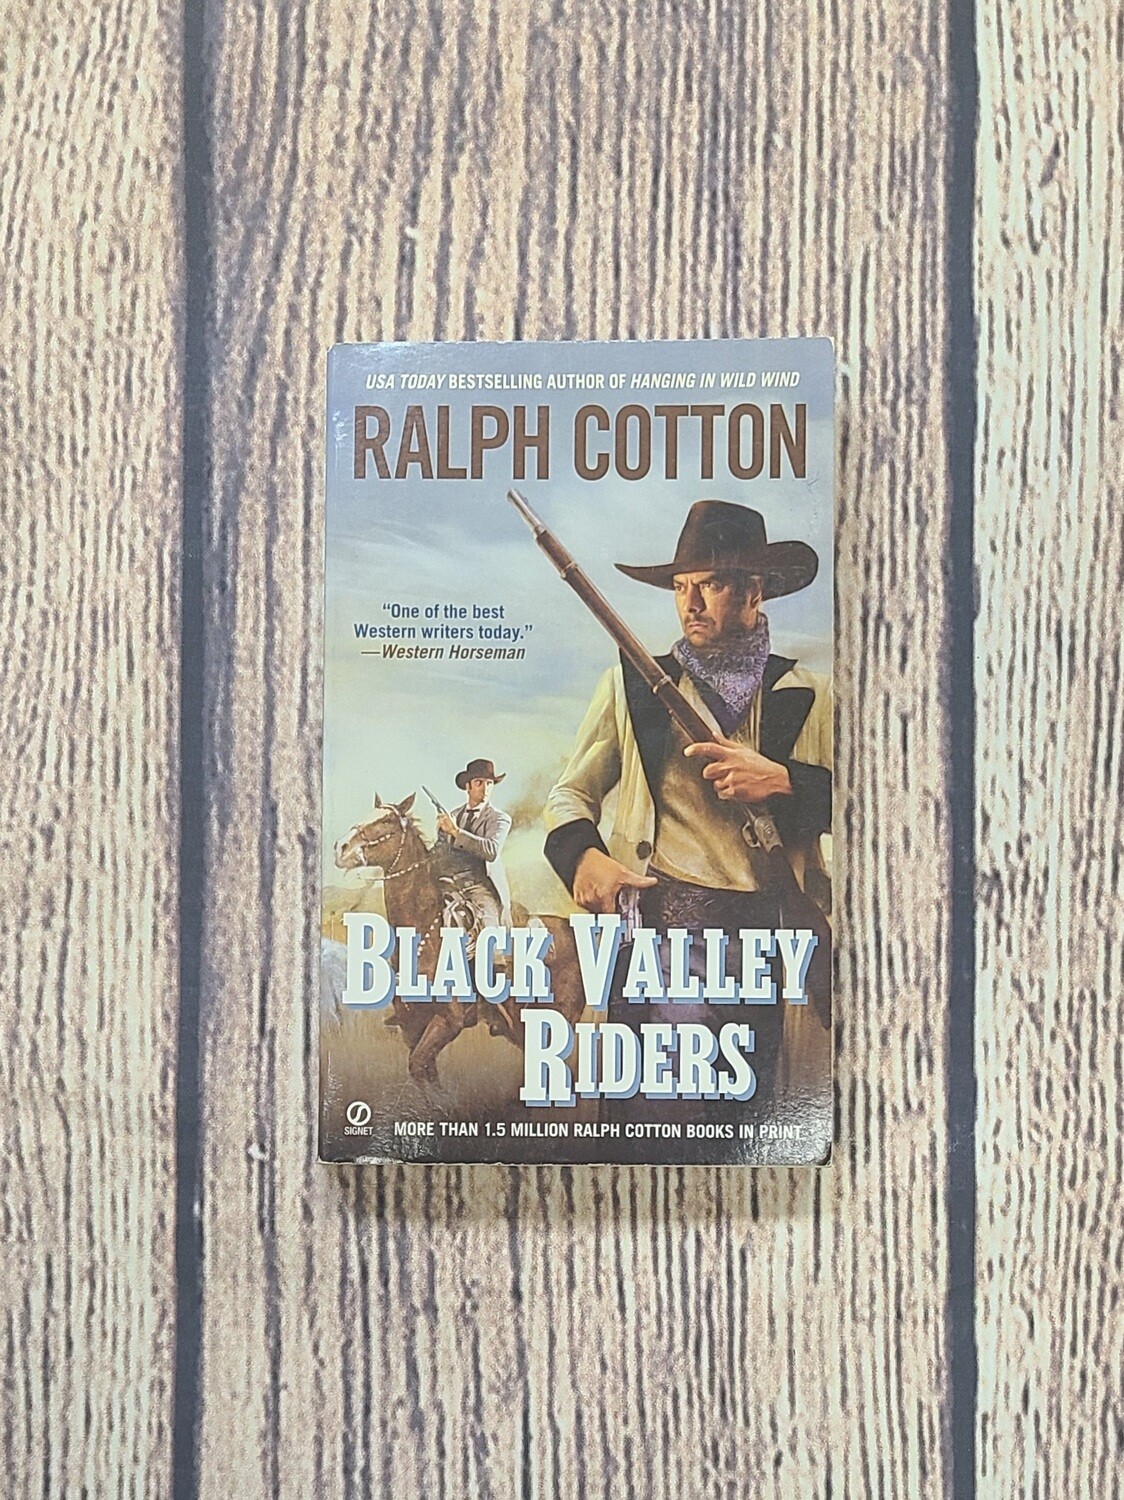 Black Valley Riders by Ralph Cotton